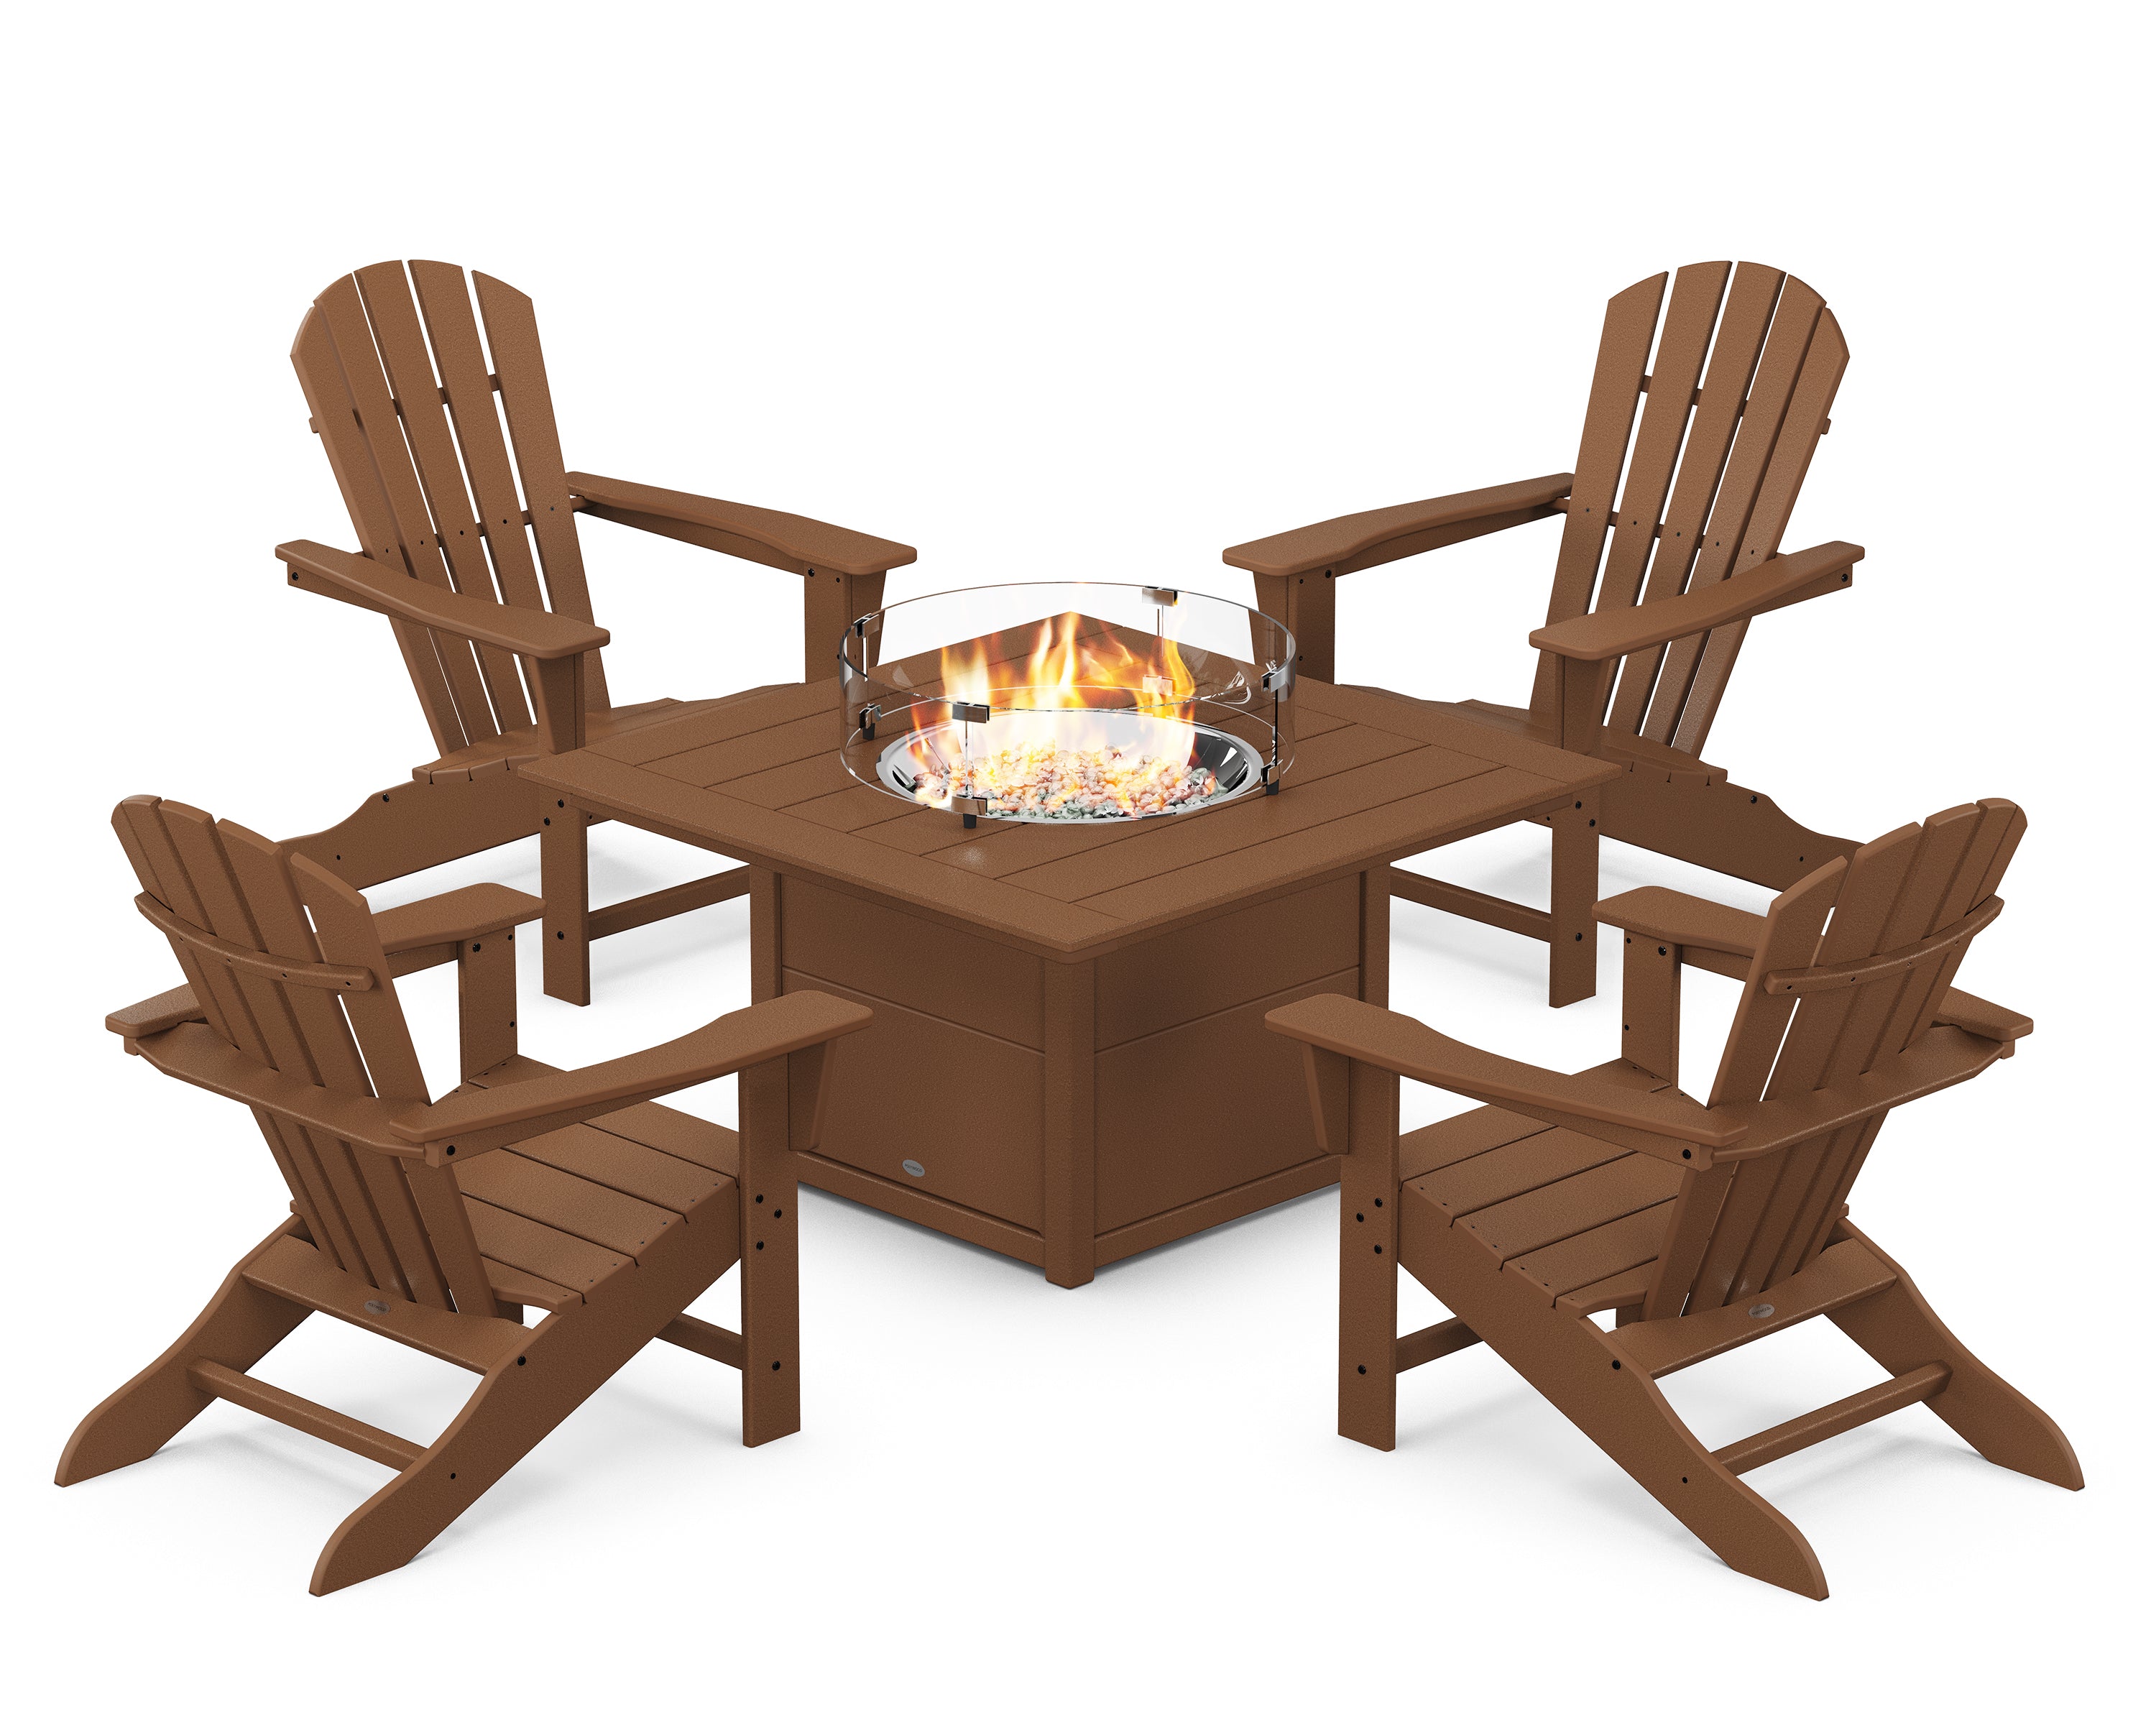 POLYWOOD® Palm Coast 5-Piece Adirondack Chair Conversation Set with Fire Pit Table in Teak